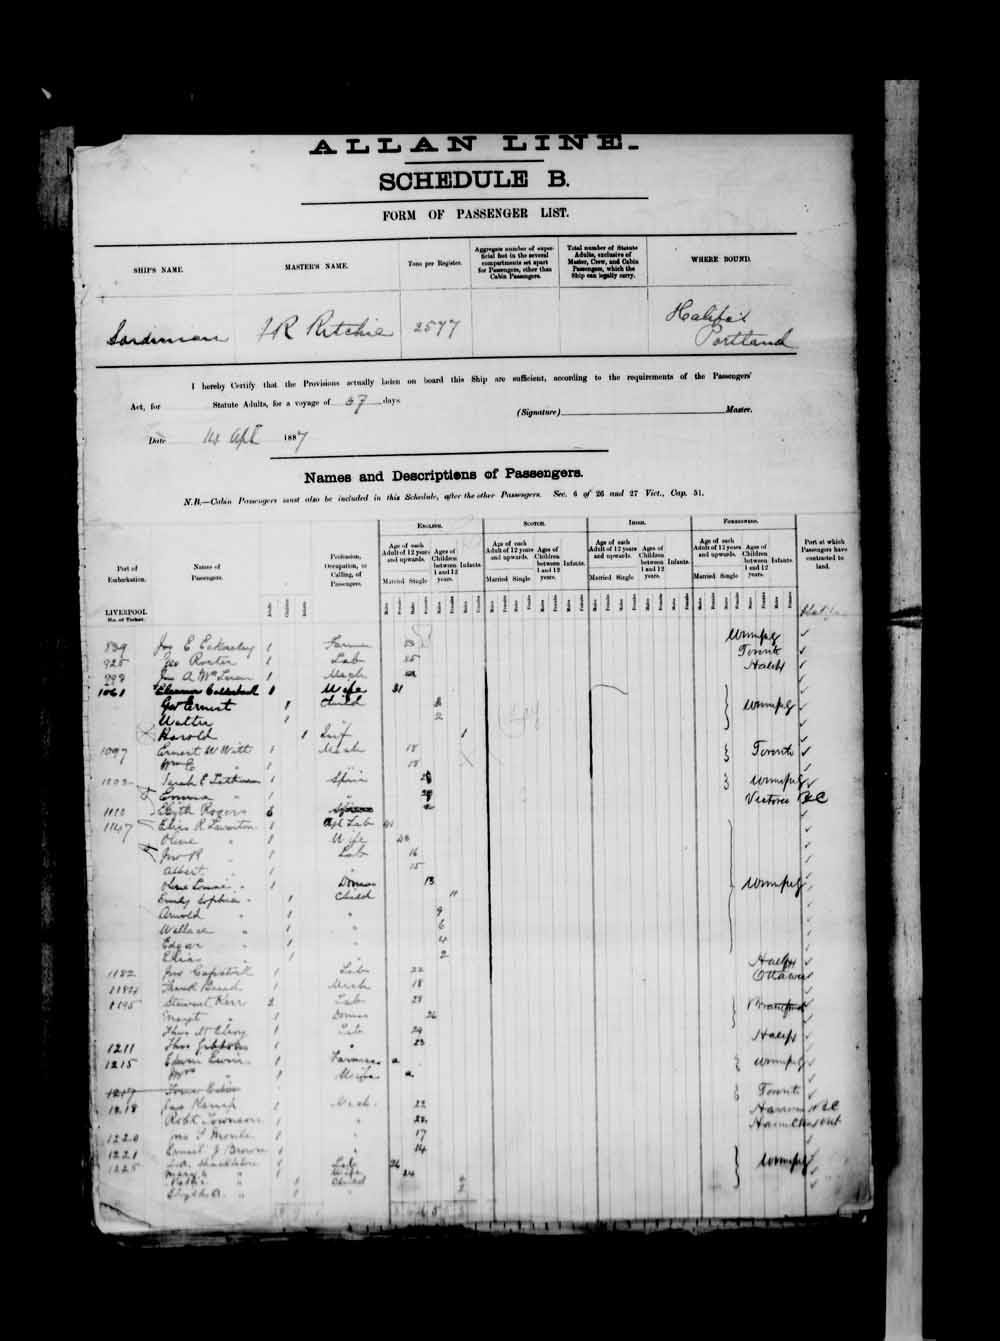 Digitized page of Passenger Lists for Image No.: e003674949